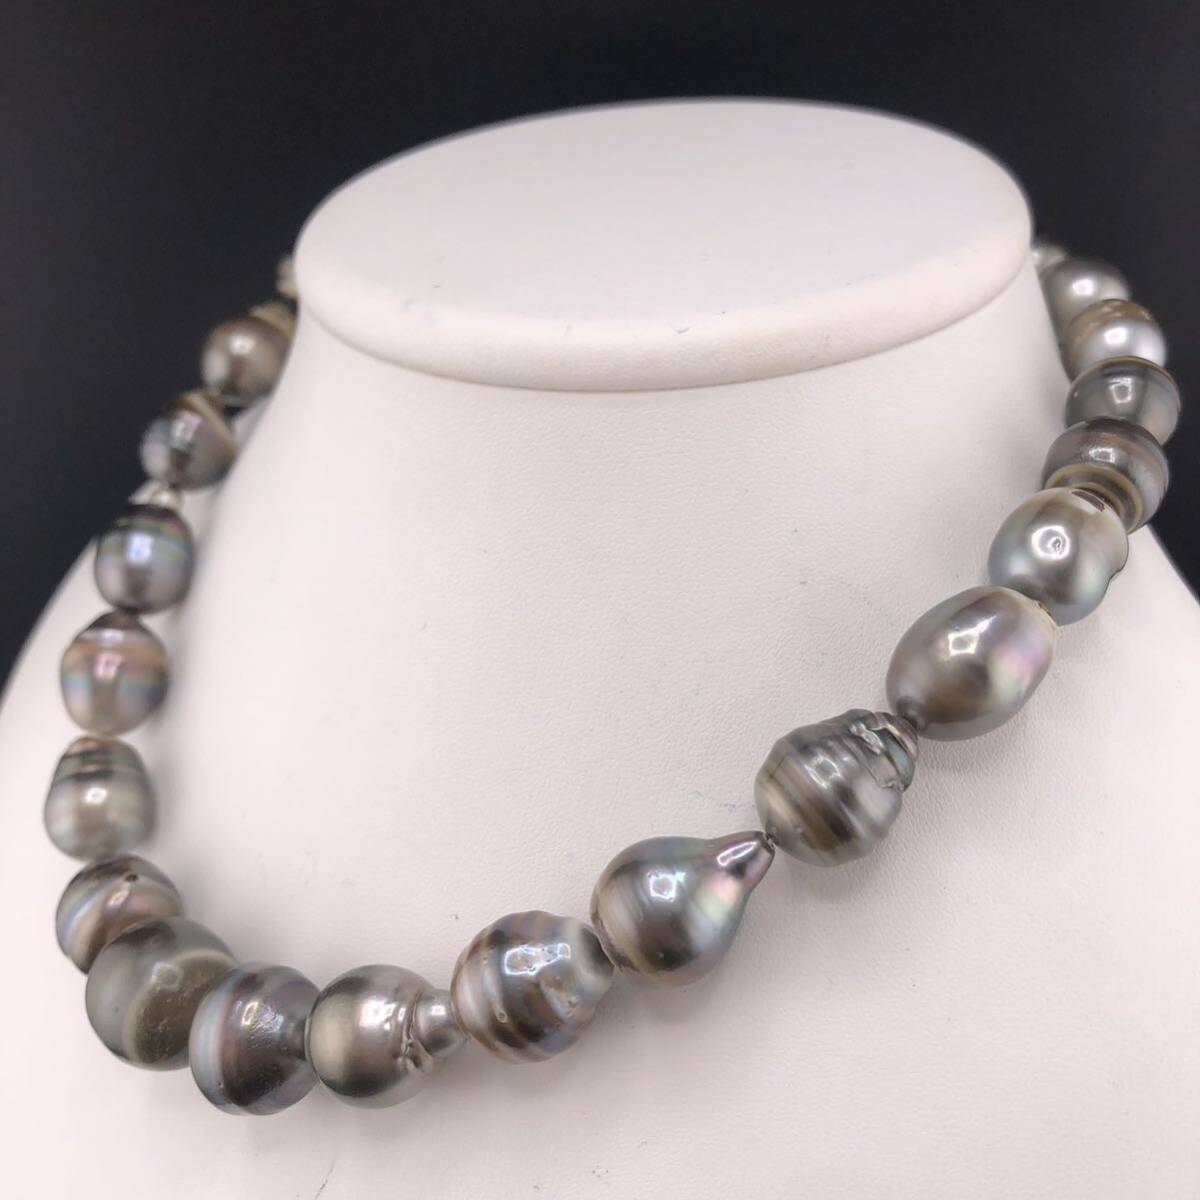 P04-0048 南洋黒蝶パールネックレス 約 12.0mm~17mm 40cm 94.4g ( 南洋真珠 黒蝶 バロック Pearl necklace SILVER )_画像2